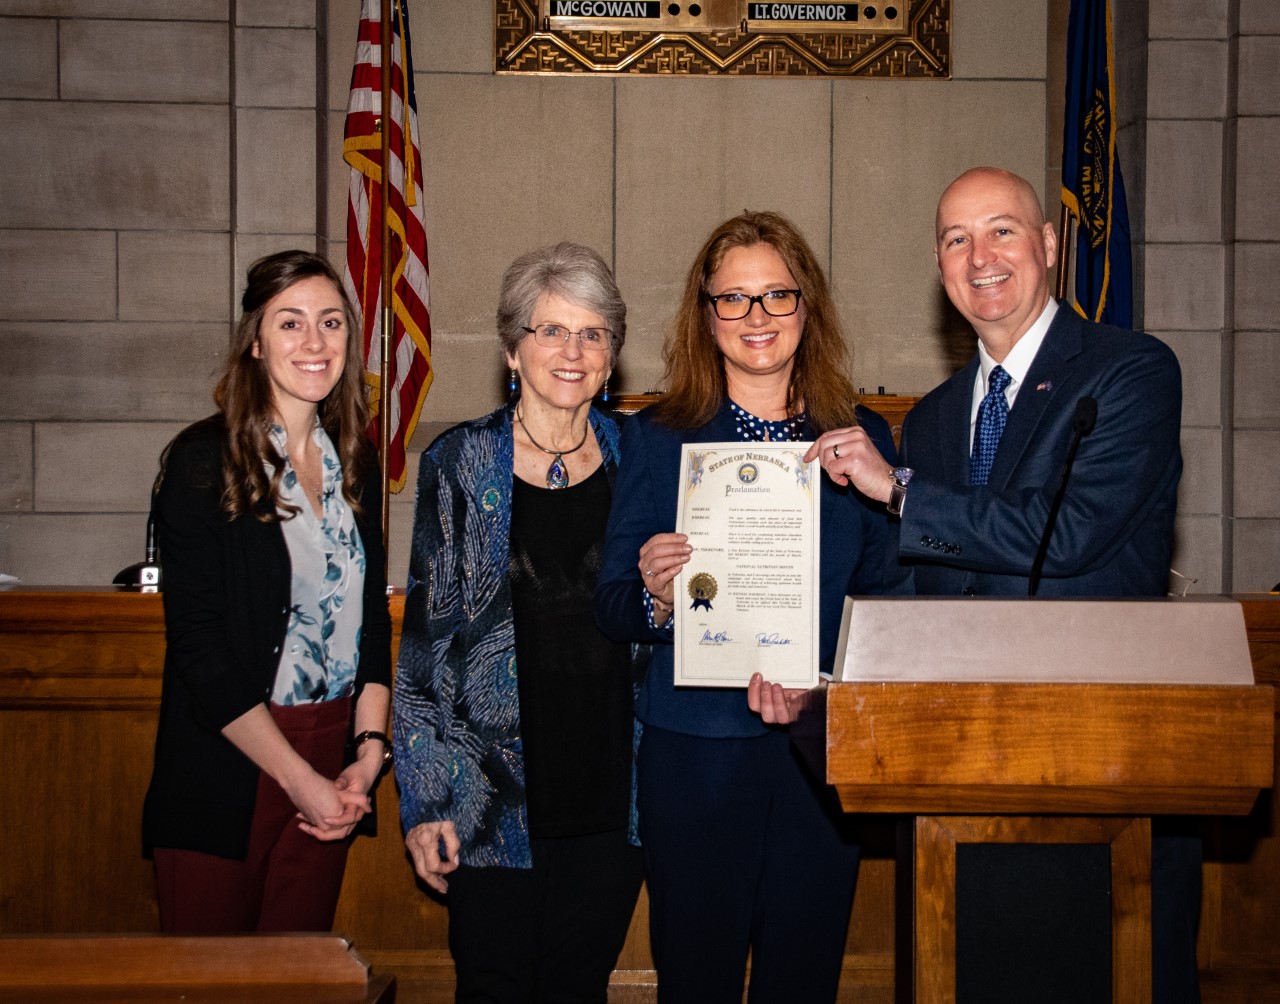 Nicole Vencil (Far Left) and Jean Ann Fisher (Right holding the certificate) stand with Gov. Ricketts as March is proclaimed National Nutrition Month